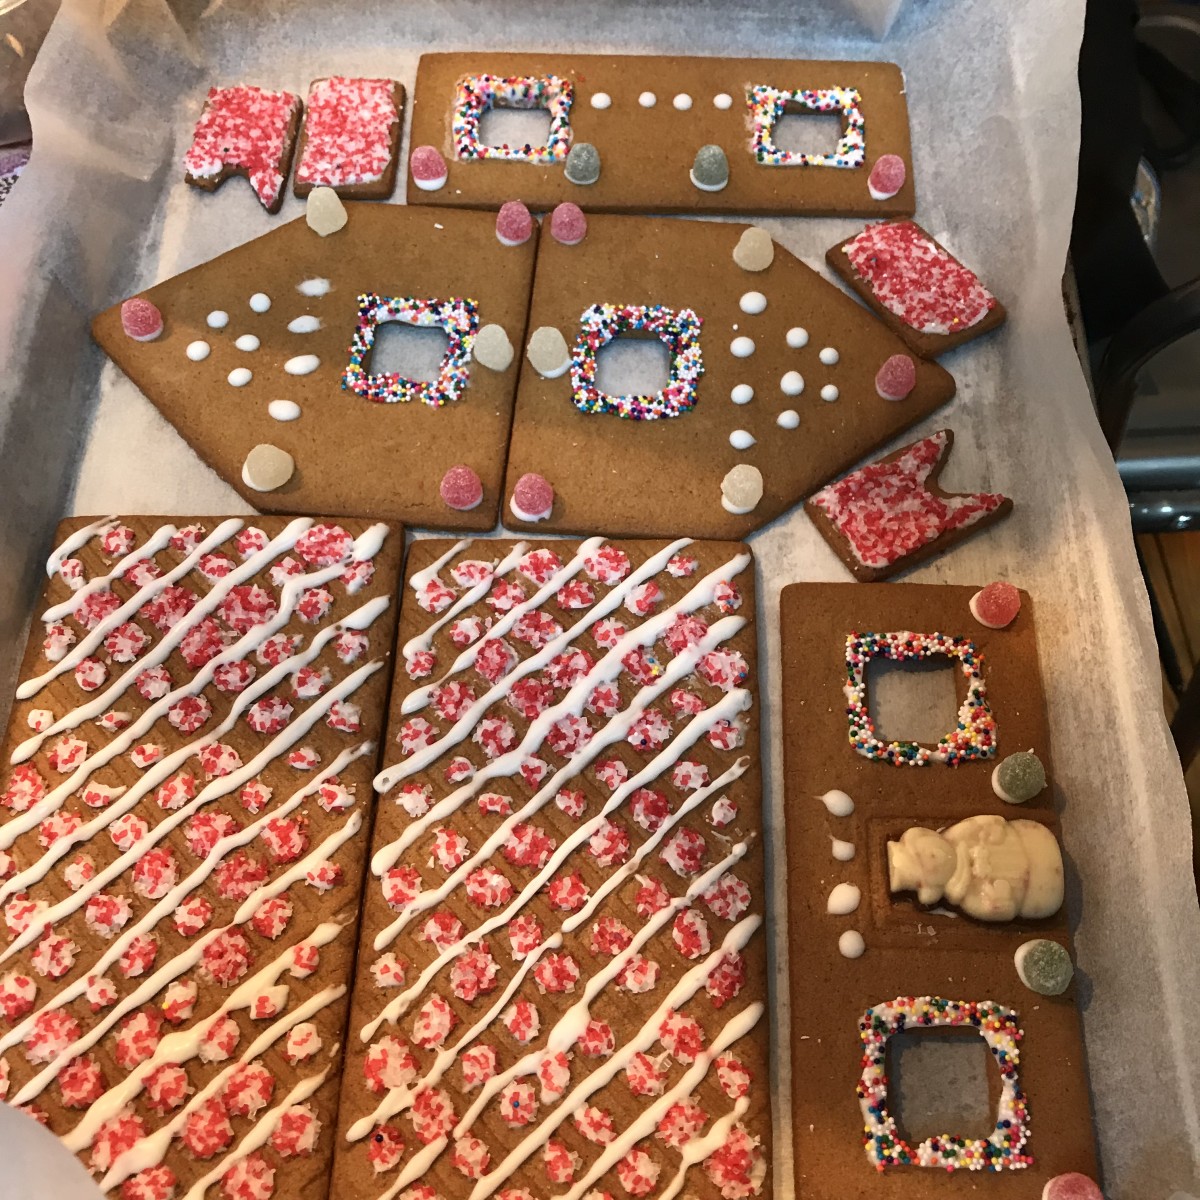 A ginger bread house, decorated and waiting for assembly